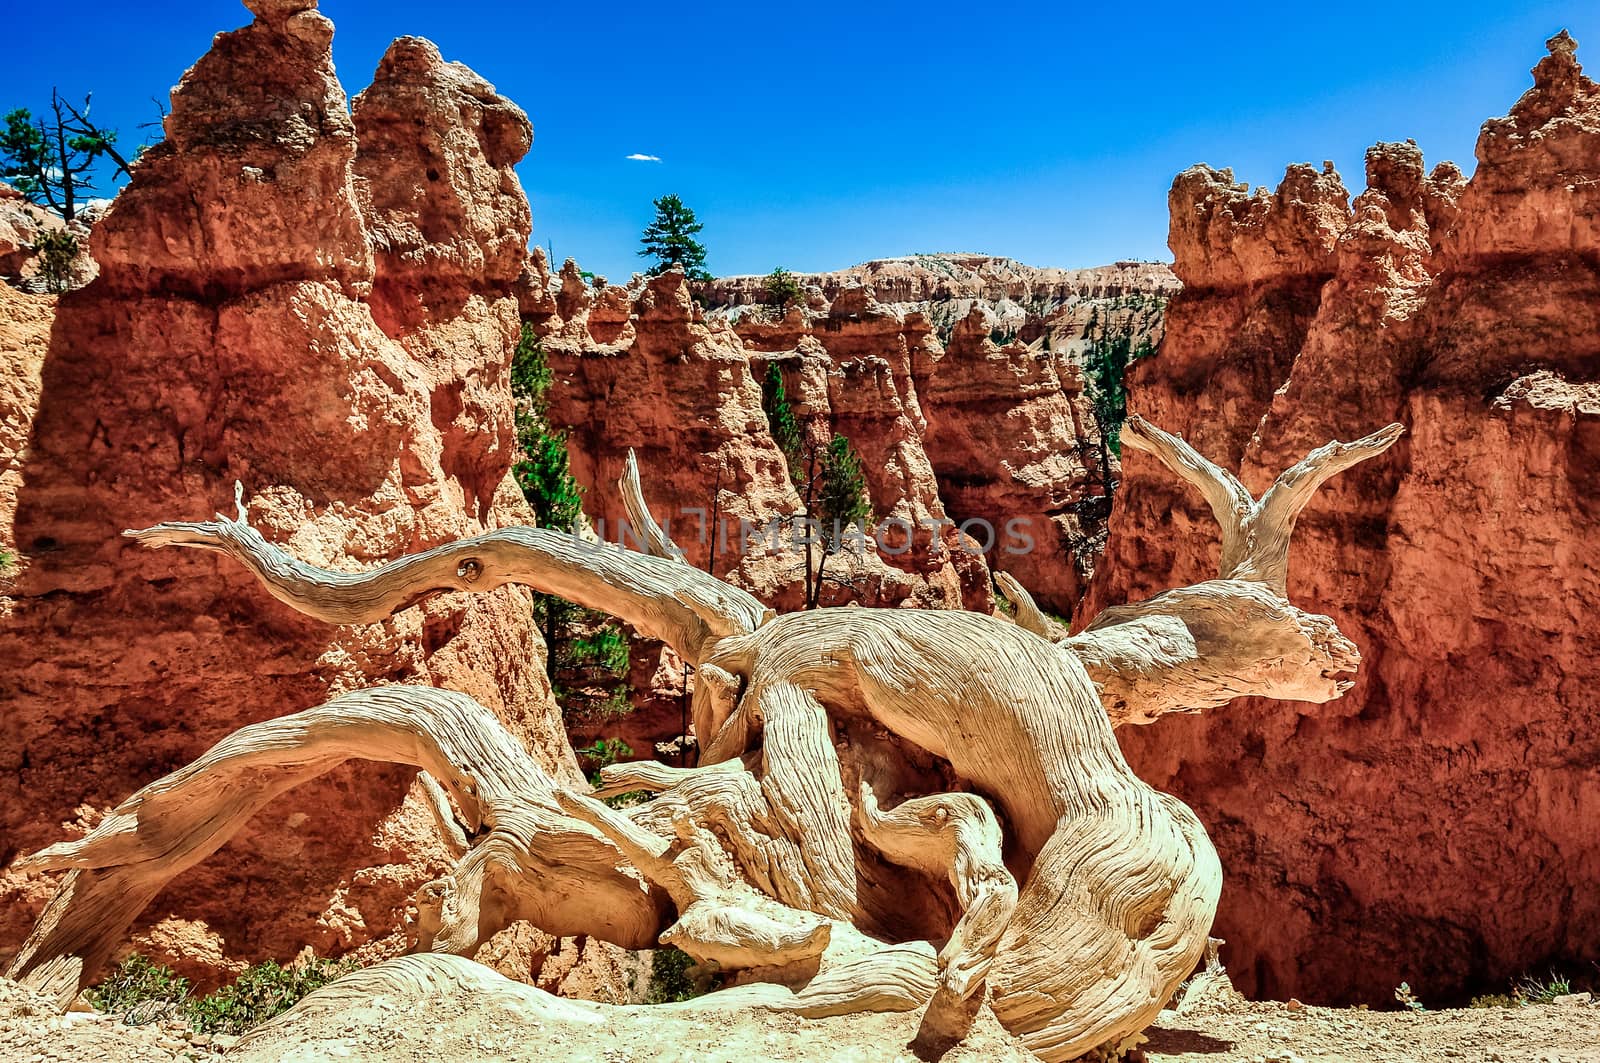 Dry tree trunk and eroded rocks in Bryce Canyon, Utah, USA